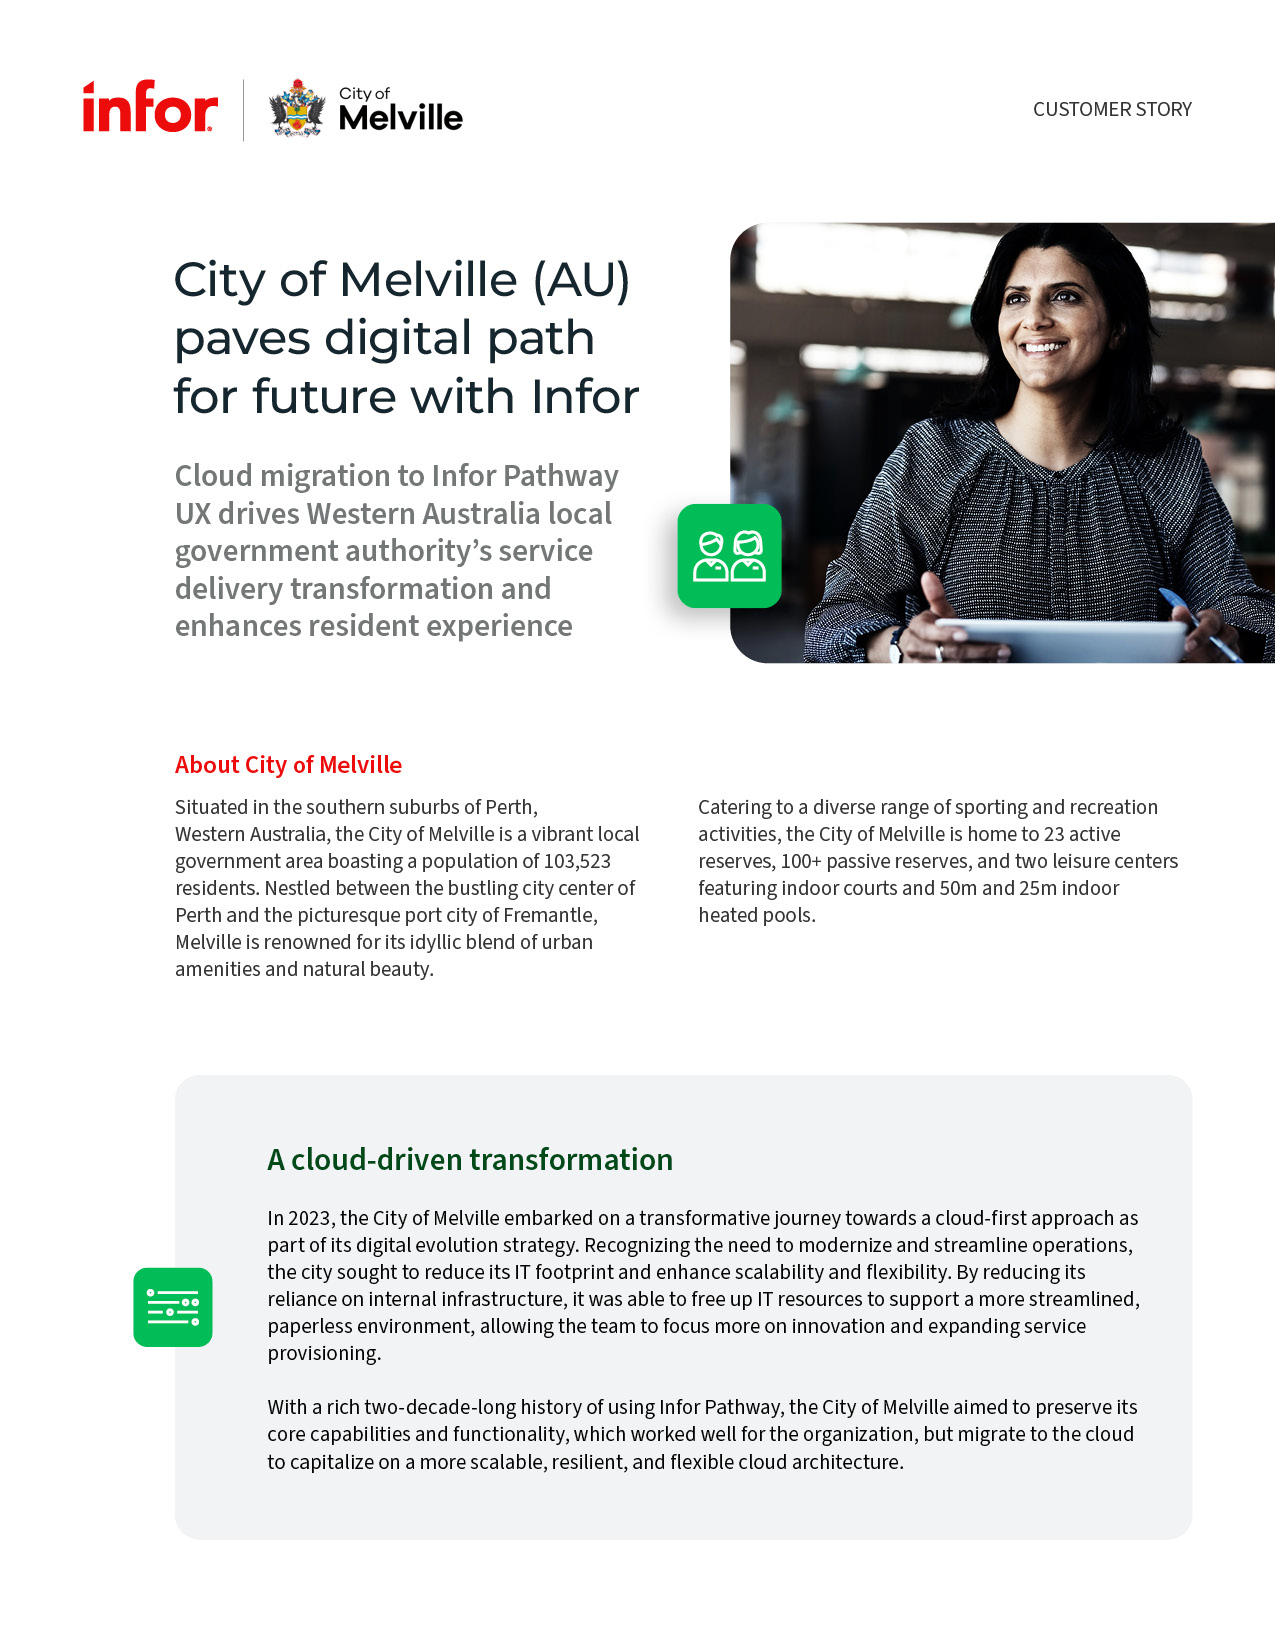 th-City-of-Melville-AU-paves-digital-path-for-future-with-Infor_Customer-story_1275x1650px_English_0624.jpg